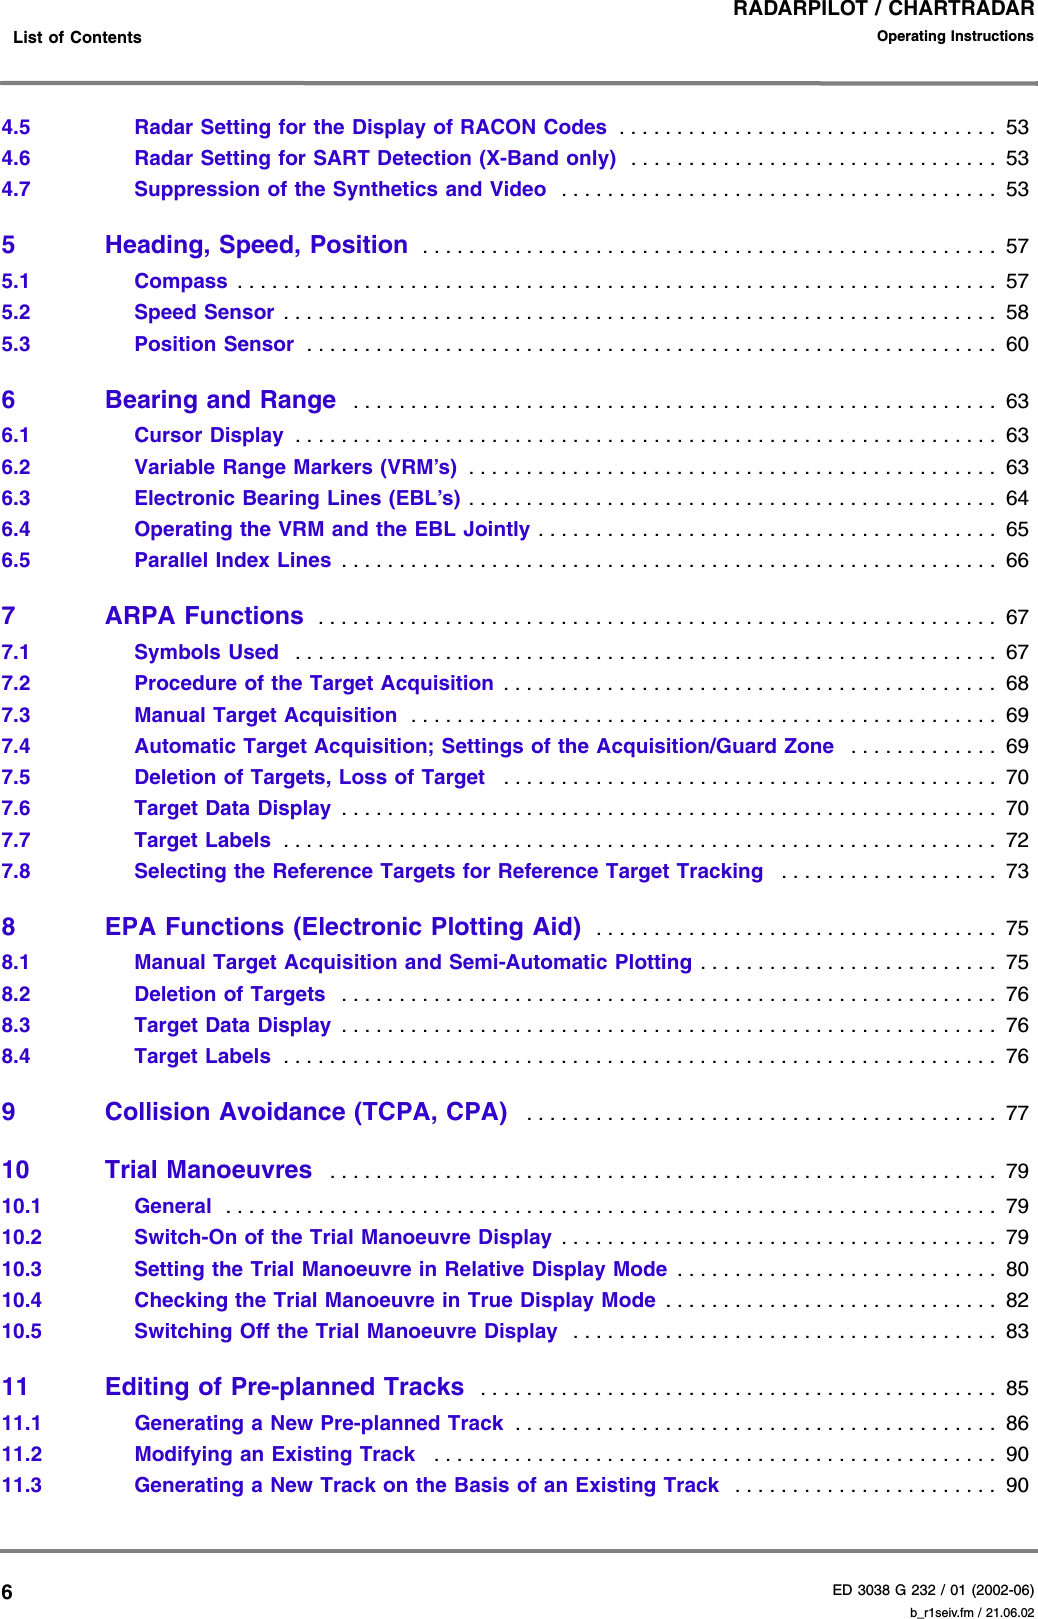 RADARPILOT / CHARTRADARED 3038 G 232 / 01 (2002-06)Operating Instructions    List of Contents b_r1seiv.fm / 21.06.0264.5 Radar Setting for the Display of RACON Codes  . . . . . . . . . . . . . . . . . . . . . . . . . . . . . . . . .  534.6 Radar Setting for SART Detection (X-Band only)  . . . . . . . . . . . . . . . . . . . . . . . . . . . . . . . .  534.7 Suppression of the Synthetics and Video  . . . . . . . . . . . . . . . . . . . . . . . . . . . . . . . . . . . . . .  535 Heading, Speed, Position  . . . . . . . . . . . . . . . . . . . . . . . . . . . . . . . . . . . . . . . . . . . . . . . . . .  575.1 Compass  . . . . . . . . . . . . . . . . . . . . . . . . . . . . . . . . . . . . . . . . . . . . . . . . . . . . . . . . . . . . . . . . . .  575.2 Speed Sensor . . . . . . . . . . . . . . . . . . . . . . . . . . . . . . . . . . . . . . . . . . . . . . . . . . . . . . . . . . . . . .  585.3 Position Sensor  . . . . . . . . . . . . . . . . . . . . . . . . . . . . . . . . . . . . . . . . . . . . . . . . . . . . . . . . . . . .  606 Bearing and Range  . . . . . . . . . . . . . . . . . . . . . . . . . . . . . . . . . . . . . . . . . . . . . . . . . . . . . . . .  636.1 Cursor Display  . . . . . . . . . . . . . . . . . . . . . . . . . . . . . . . . . . . . . . . . . . . . . . . . . . . . . . . . . . . . .  636.2 Variable Range Markers (VRM’s)  . . . . . . . . . . . . . . . . . . . . . . . . . . . . . . . . . . . . . . . . . . . . . .  636.3 Electronic Bearing Lines (EBL’s) . . . . . . . . . . . . . . . . . . . . . . . . . . . . . . . . . . . . . . . . . . . . . .  646.4 Operating the VRM and the EBL Jointly . . . . . . . . . . . . . . . . . . . . . . . . . . . . . . . . . . . . . . . .  656.5 Parallel Index Lines  . . . . . . . . . . . . . . . . . . . . . . . . . . . . . . . . . . . . . . . . . . . . . . . . . . . . . . . . .  667 ARPA Functions  . . . . . . . . . . . . . . . . . . . . . . . . . . . . . . . . . . . . . . . . . . . . . . . . . . . . . . . . . . .  677.1 Symbols Used   . . . . . . . . . . . . . . . . . . . . . . . . . . . . . . . . . . . . . . . . . . . . . . . . . . . . . . . . . . . . .  677.2 Procedure of the Target Acquisition . . . . . . . . . . . . . . . . . . . . . . . . . . . . . . . . . . . . . . . . . . .  687.3 Manual Target Acquisition  . . . . . . . . . . . . . . . . . . . . . . . . . . . . . . . . . . . . . . . . . . . . . . . . . . .  697.4 Automatic Target Acquisition; Settings of the Acquisition/Guard Zone   . . . . . . . . . . . . .  697.5 Deletion of Targets, Loss of Target   . . . . . . . . . . . . . . . . . . . . . . . . . . . . . . . . . . . . . . . . . . .  707.6 Target Data Display  . . . . . . . . . . . . . . . . . . . . . . . . . . . . . . . . . . . . . . . . . . . . . . . . . . . . . . . . .  707.7 Target Labels  . . . . . . . . . . . . . . . . . . . . . . . . . . . . . . . . . . . . . . . . . . . . . . . . . . . . . . . . . . . . . .  727.8 Selecting the Reference Targets for Reference Target Tracking   . . . . . . . . . . . . . . . . . . .  738 EPA Functions (Electronic Plotting Aid)  . . . . . . . . . . . . . . . . . . . . . . . . . . . . . . . . . . .  758.1 Manual Target Acquisition and Semi-Automatic Plotting . . . . . . . . . . . . . . . . . . . . . . . . . .  758.2 Deletion of Targets  . . . . . . . . . . . . . . . . . . . . . . . . . . . . . . . . . . . . . . . . . . . . . . . . . . . . . . . . .  768.3 Target Data Display  . . . . . . . . . . . . . . . . . . . . . . . . . . . . . . . . . . . . . . . . . . . . . . . . . . . . . . . . .  768.4 Target Labels  . . . . . . . . . . . . . . . . . . . . . . . . . . . . . . . . . . . . . . . . . . . . . . . . . . . . . . . . . . . . . .  769 Collision Avoidance (TCPA, CPA)   . . . . . . . . . . . . . . . . . . . . . . . . . . . . . . . . . . . . . . . . .  7710 Trial Manoeuvres  . . . . . . . . . . . . . . . . . . . . . . . . . . . . . . . . . . . . . . . . . . . . . . . . . . . . . . . . . .  7910.1 General   . . . . . . . . . . . . . . . . . . . . . . . . . . . . . . . . . . . . . . . . . . . . . . . . . . . . . . . . . . . . . . . . . . .  7910.2 Switch-On of the Trial Manoeuvre Display . . . . . . . . . . . . . . . . . . . . . . . . . . . . . . . . . . . . . .  7910.3 Setting the Trial Manoeuvre in Relative Display Mode  . . . . . . . . . . . . . . . . . . . . . . . . . . . .  8010.4 Checking the Trial Manoeuvre in True Display Mode  . . . . . . . . . . . . . . . . . . . . . . . . . . . . .  8210.5 Switching Off the Trial Manoeuvre Display  . . . . . . . . . . . . . . . . . . . . . . . . . . . . . . . . . . . . .  8311 Editing of Pre-planned Tracks  . . . . . . . . . . . . . . . . . . . . . . . . . . . . . . . . . . . . . . . . . . . . .  8511.1 Generating a New Pre-planned Track  . . . . . . . . . . . . . . . . . . . . . . . . . . . . . . . . . . . . . . . . . .  8611.2 Modifying an Existing Track   . . . . . . . . . . . . . . . . . . . . . . . . . . . . . . . . . . . . . . . . . . . . . . . . .  9011.3 Generating a New Track on the Basis of an Existing Track   . . . . . . . . . . . . . . . . . . . . . . .  90